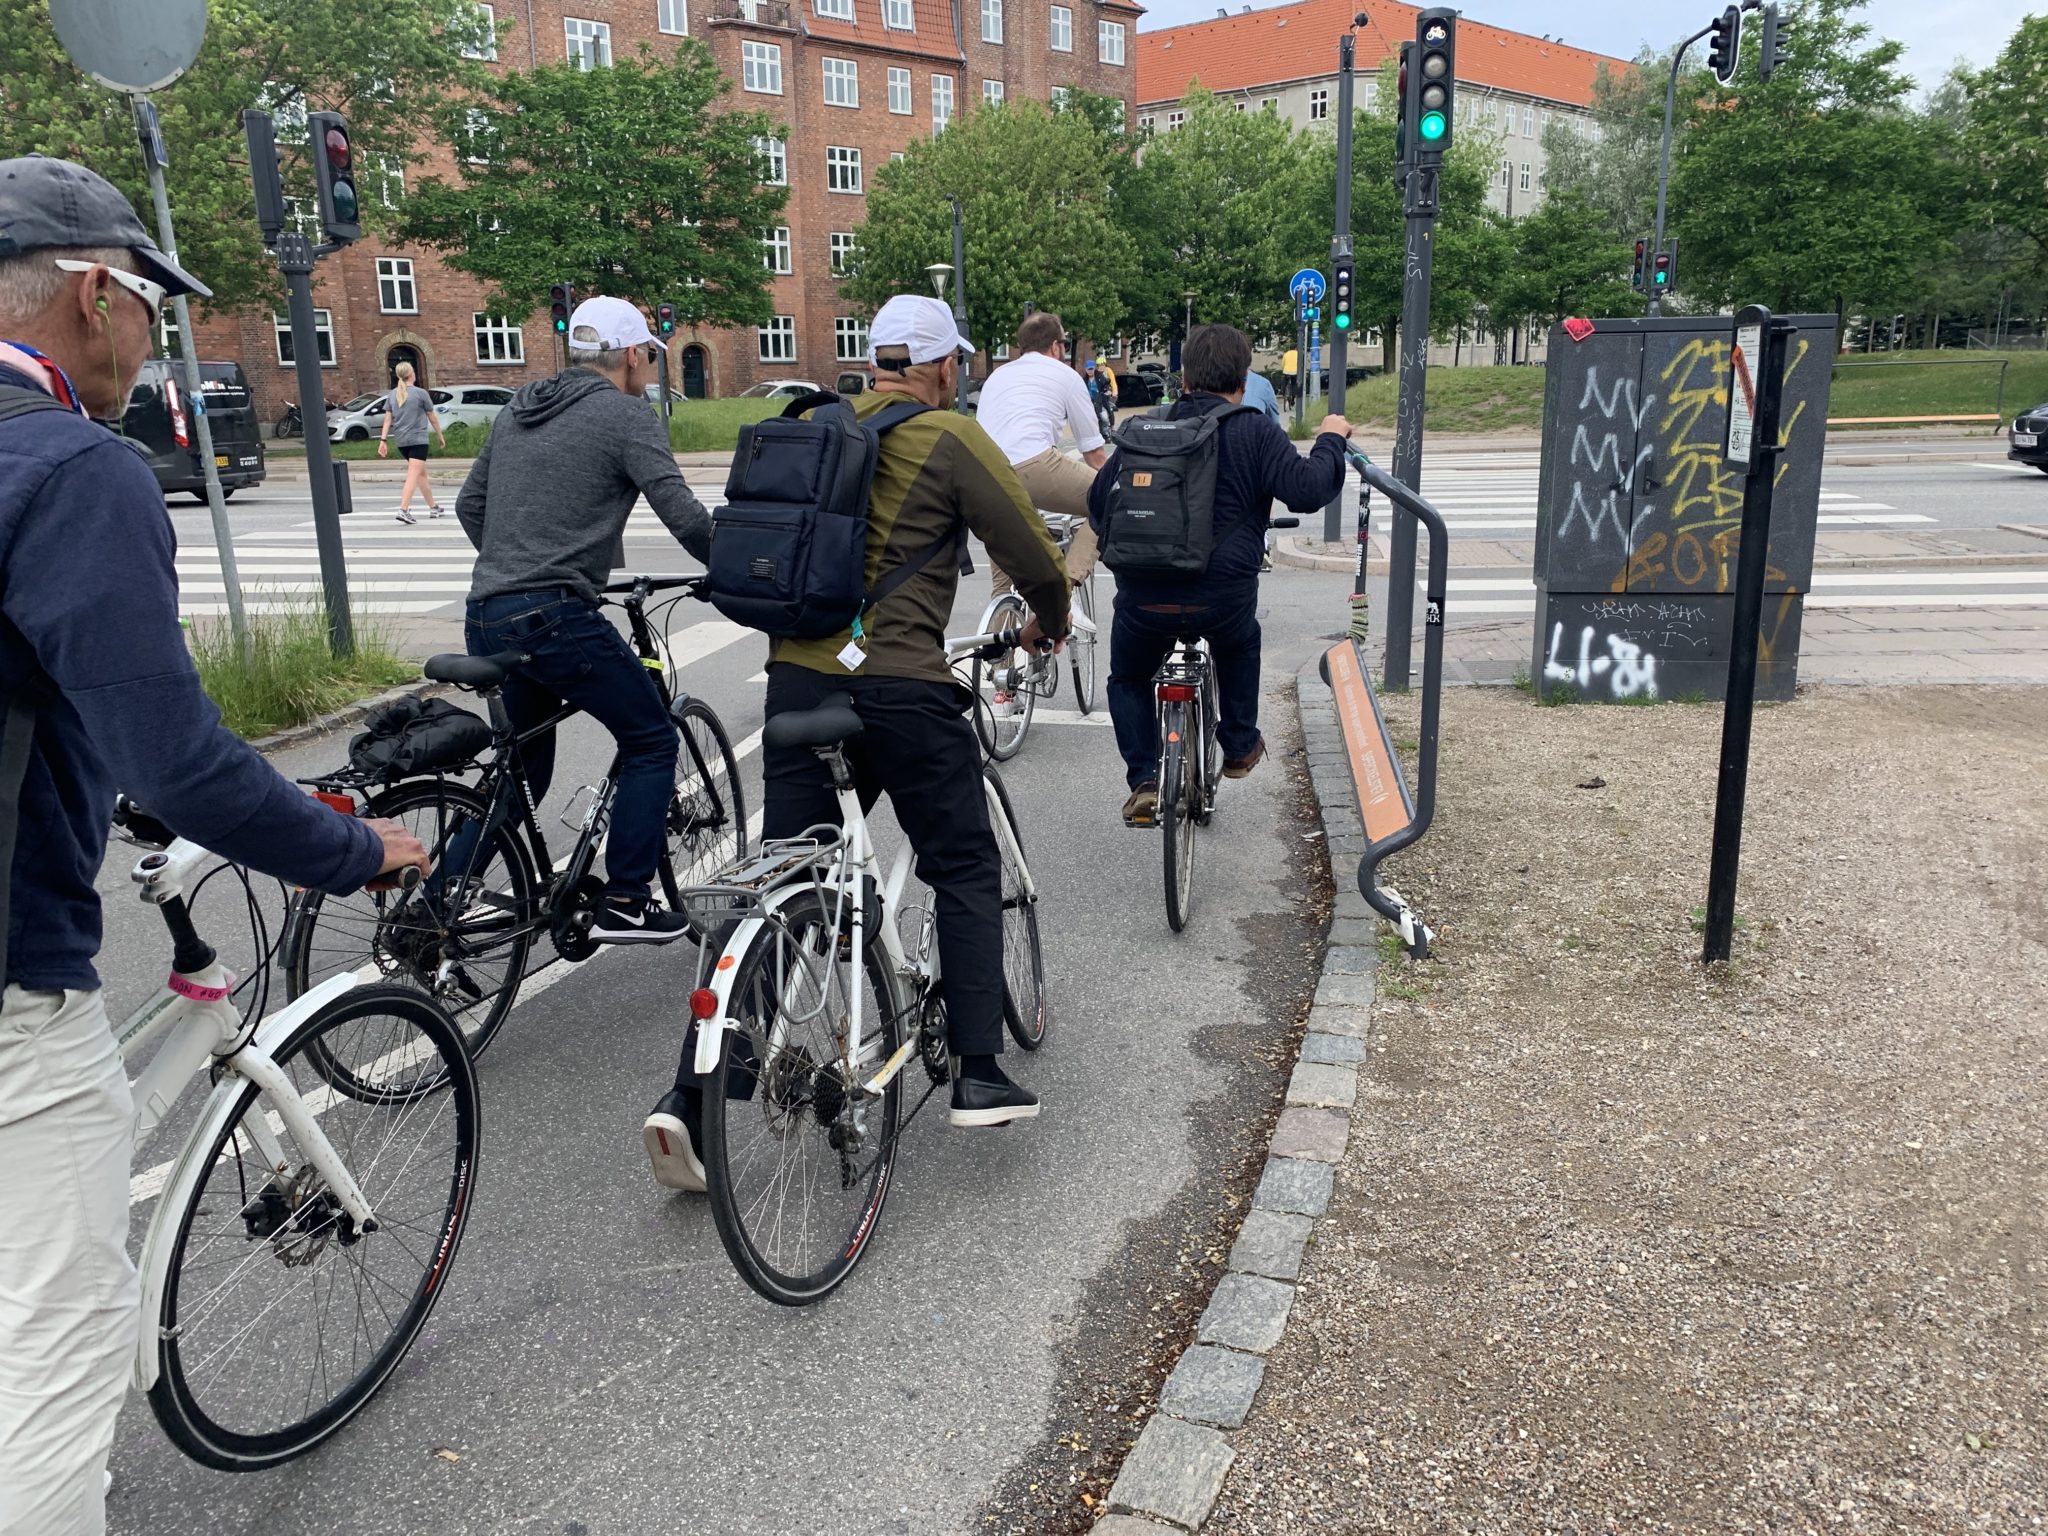 People crossing an intersection on a bike path.